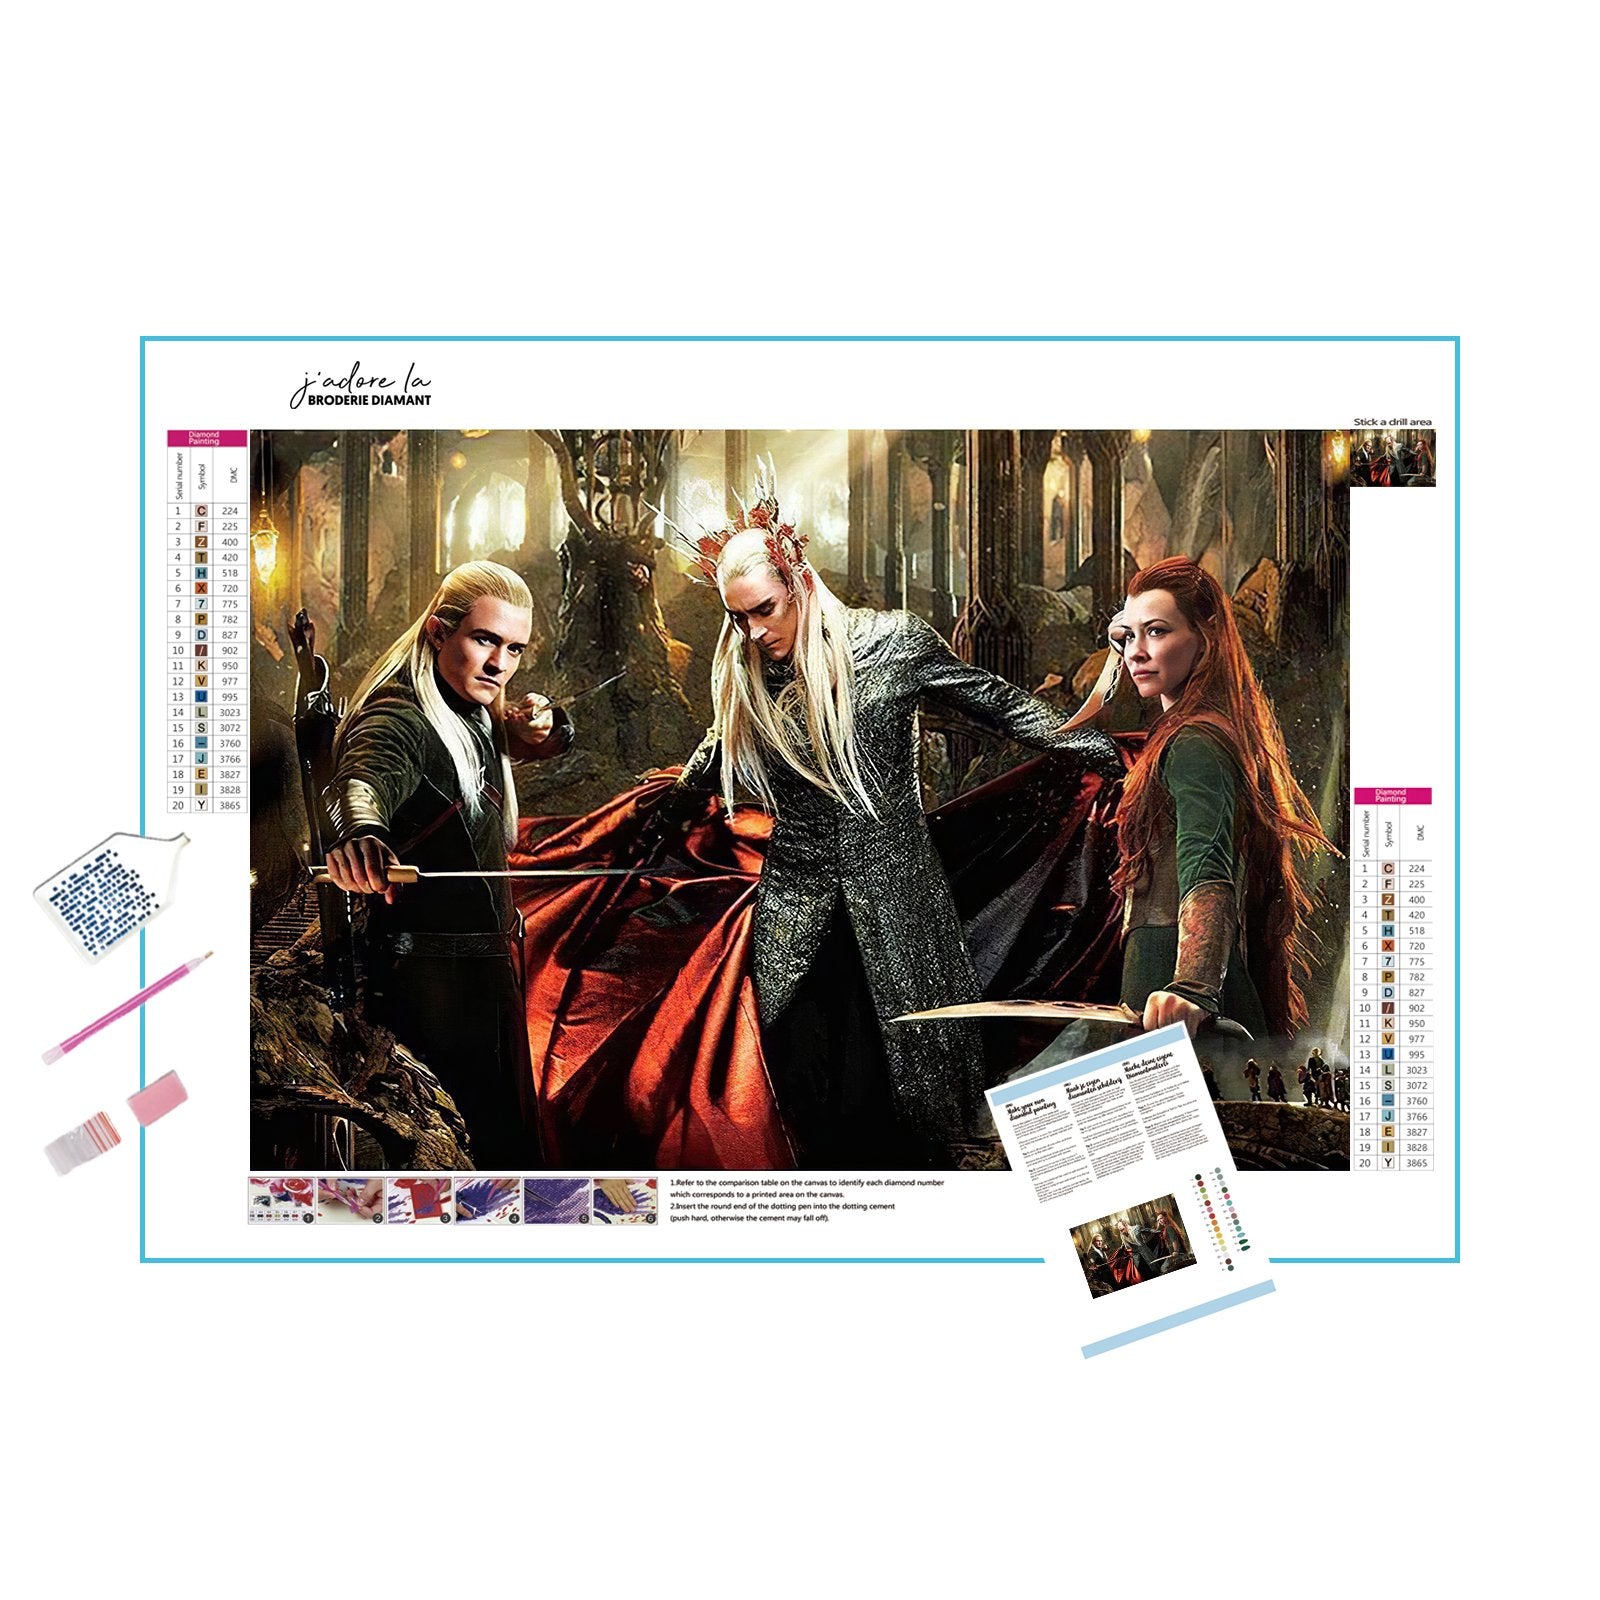 Step into Middle-earth with Legolas and company.Legolas, Tauriel And Thranduil From The Hobbit - Diamondartlove